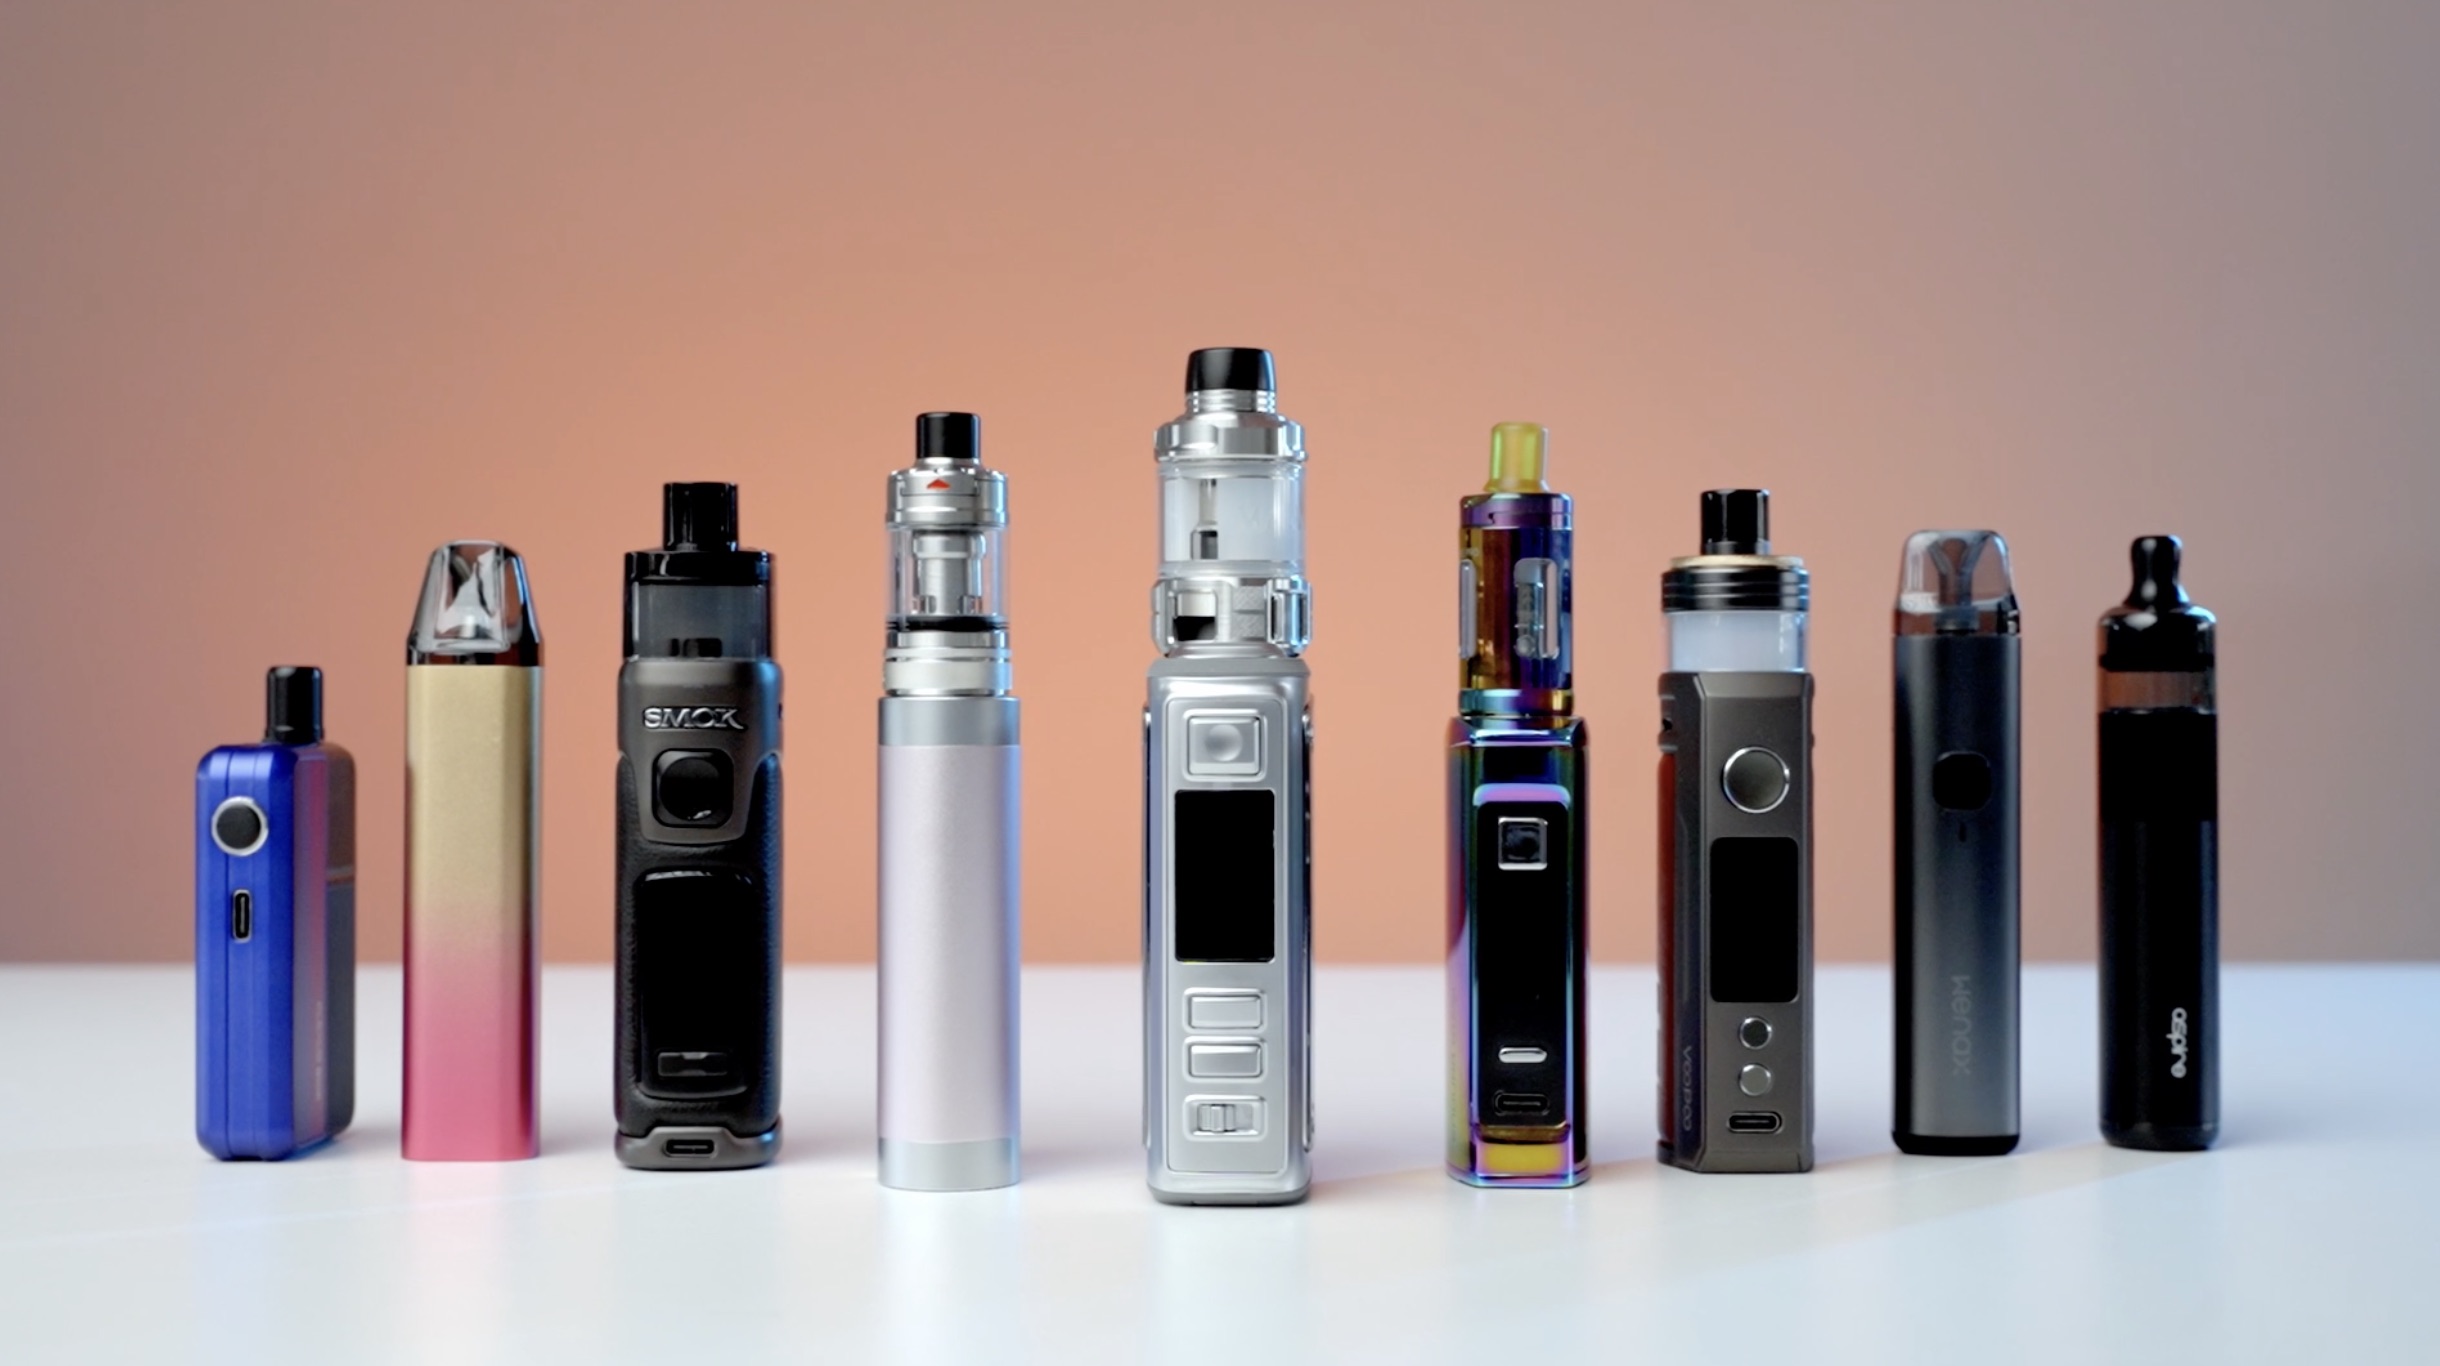 The Ultimate Review of Relevant Vapes Products